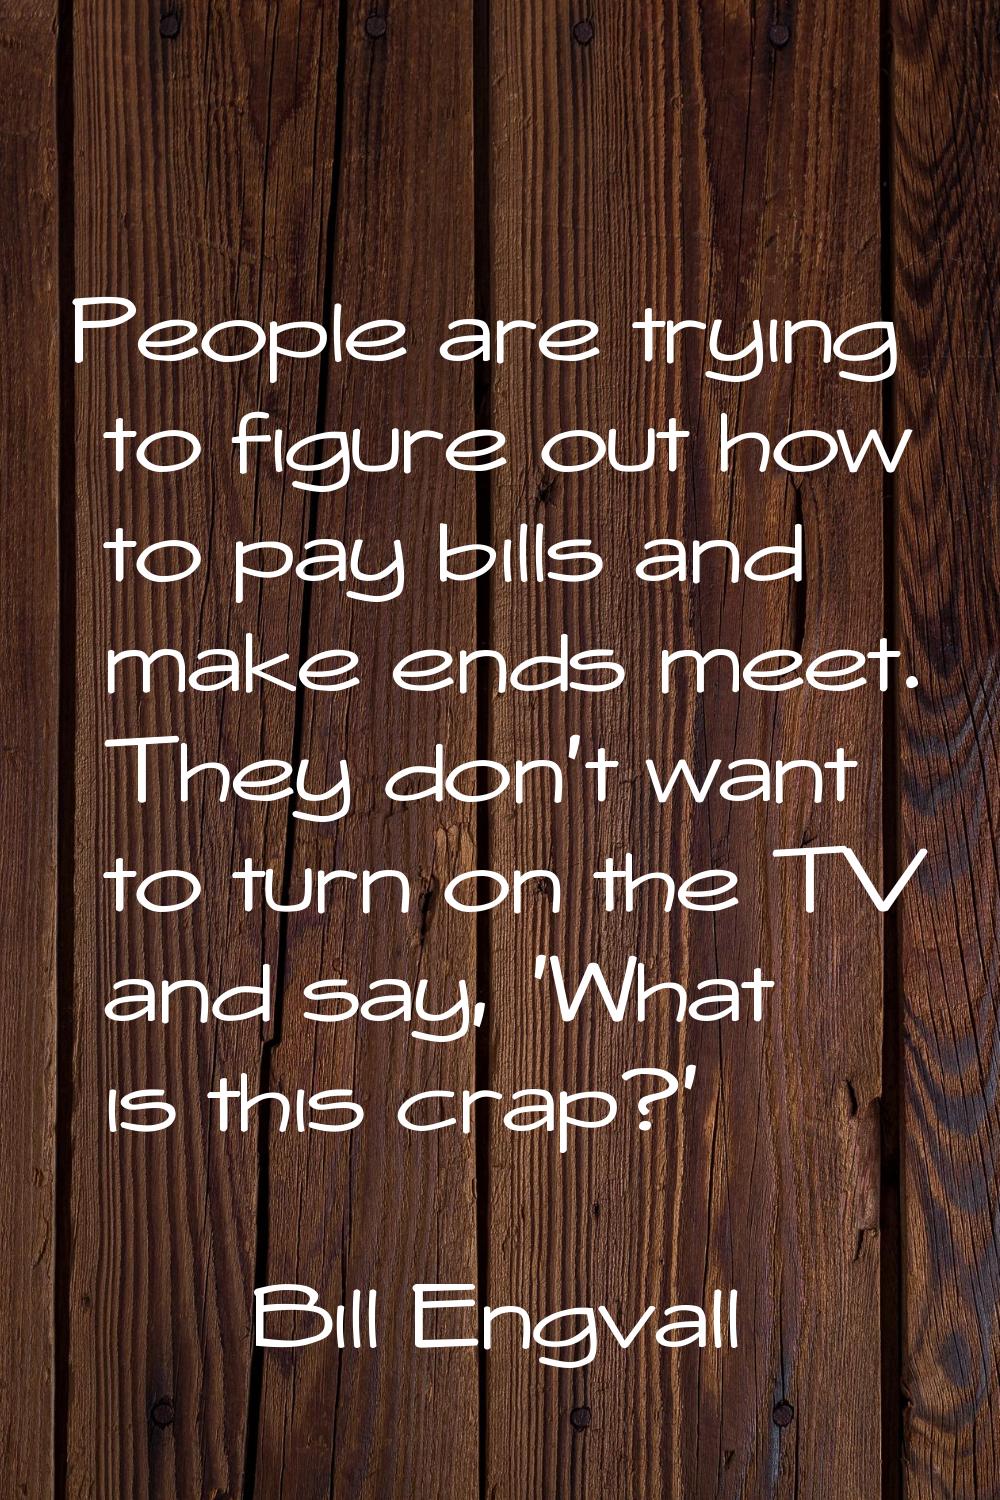 People are trying to figure out how to pay bills and make ends meet. They don't want to turn on the